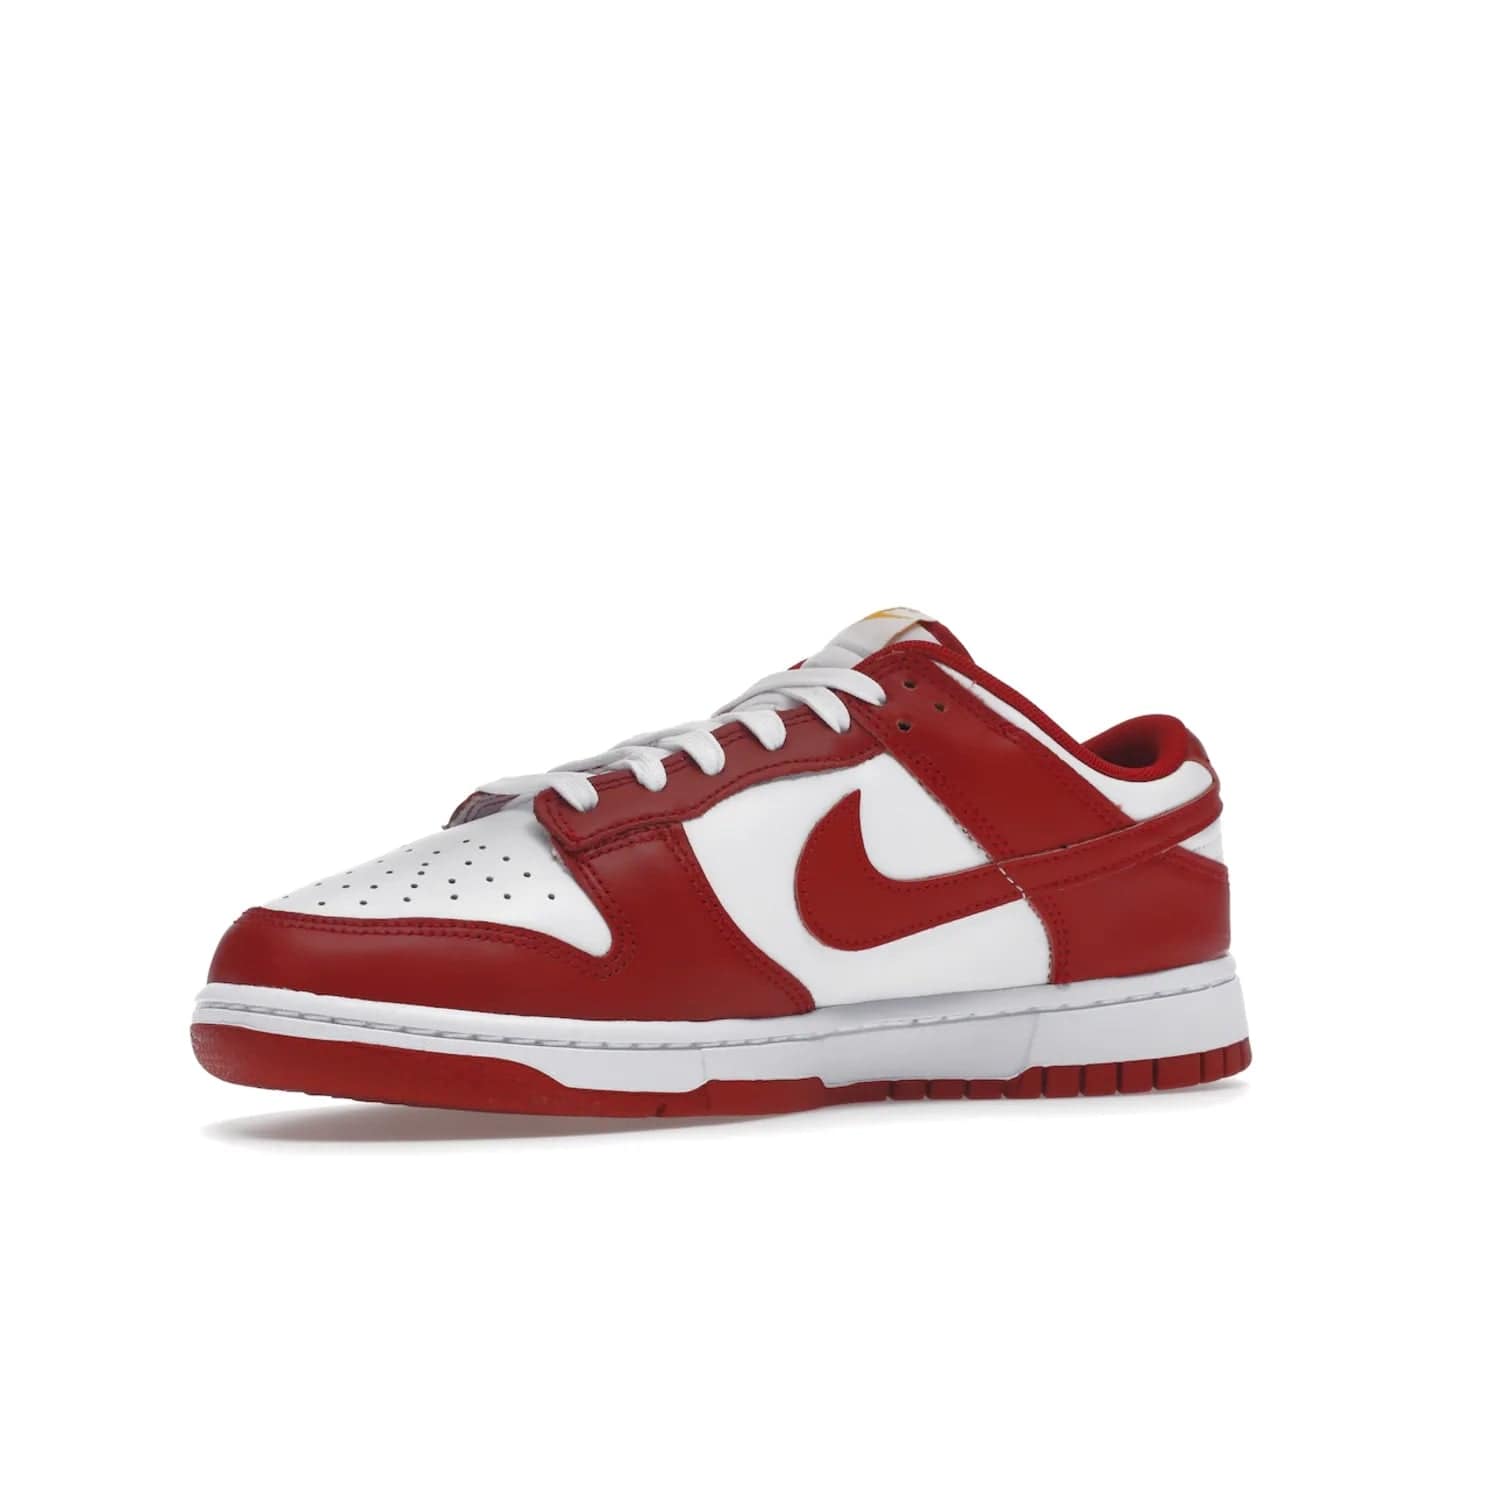 Nike Dunk Low USC - Image 16 - Only at www.BallersClubKickz.com - The Nike Dunk Low USC DD1391-602 colorway captures the eye of University of Southern California fans. Crafted with leather and rubber upper and outsole, this stylish sneaker features a white, gym red, and yellow colorway. With yellow Nike branding, white perforated vamp, and red suede Swoosh, this sneaker turns heads. Get the classic Nike Dunk Low USC releasing on November 9th, 2022.